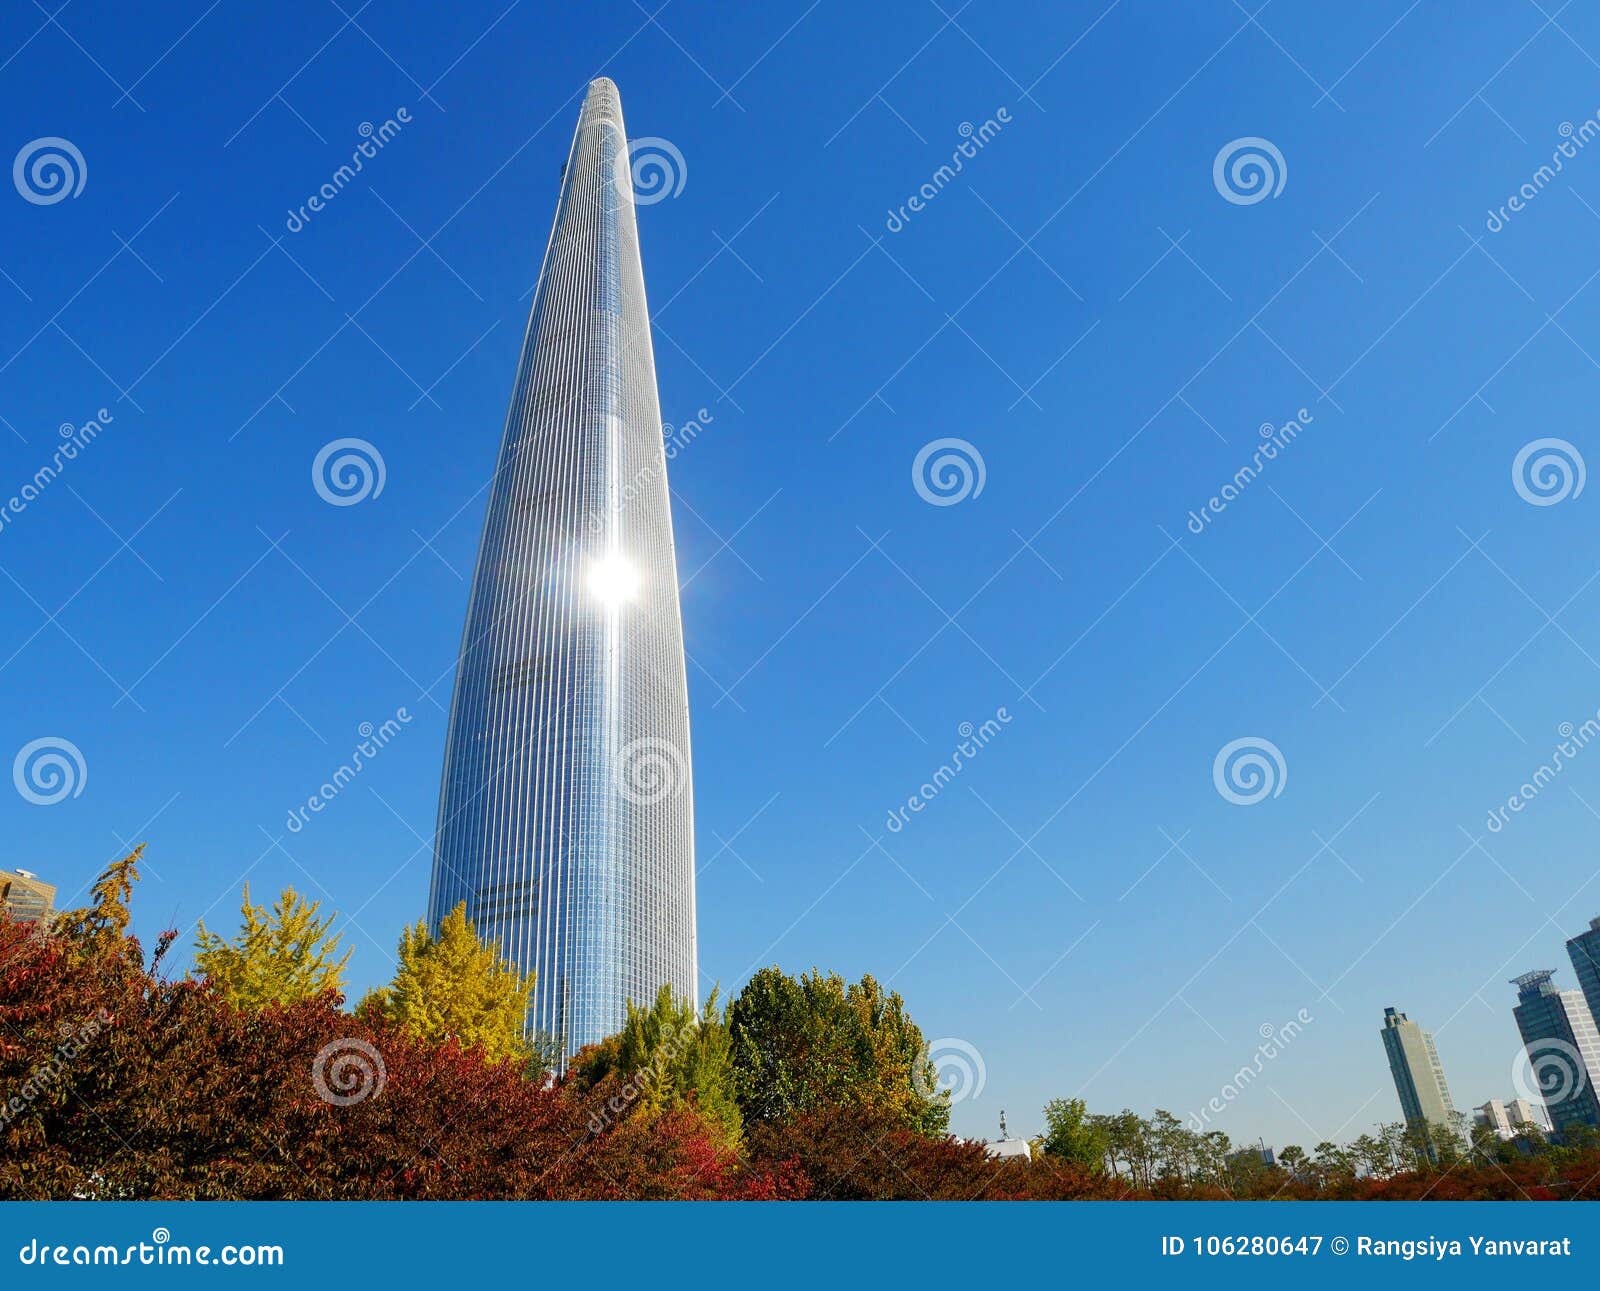 lotte world tower